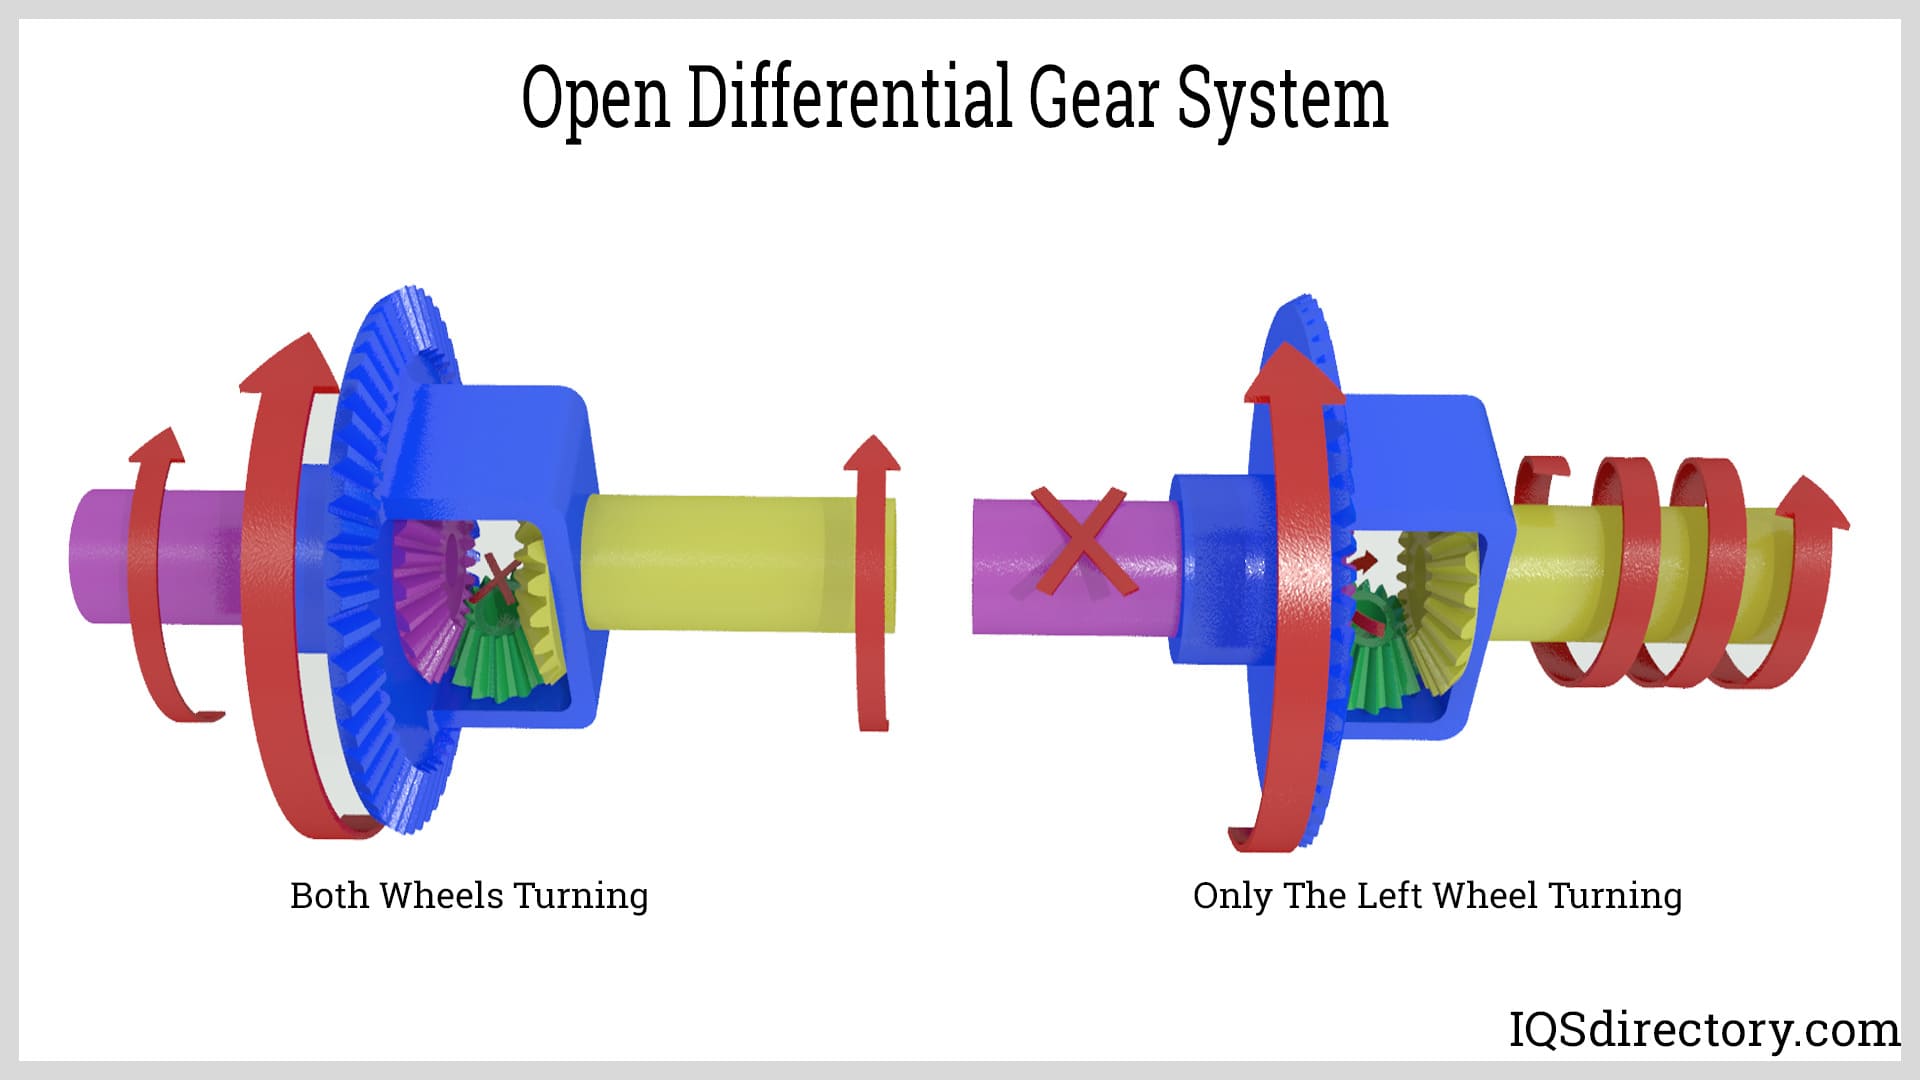 Open Differential Gear System